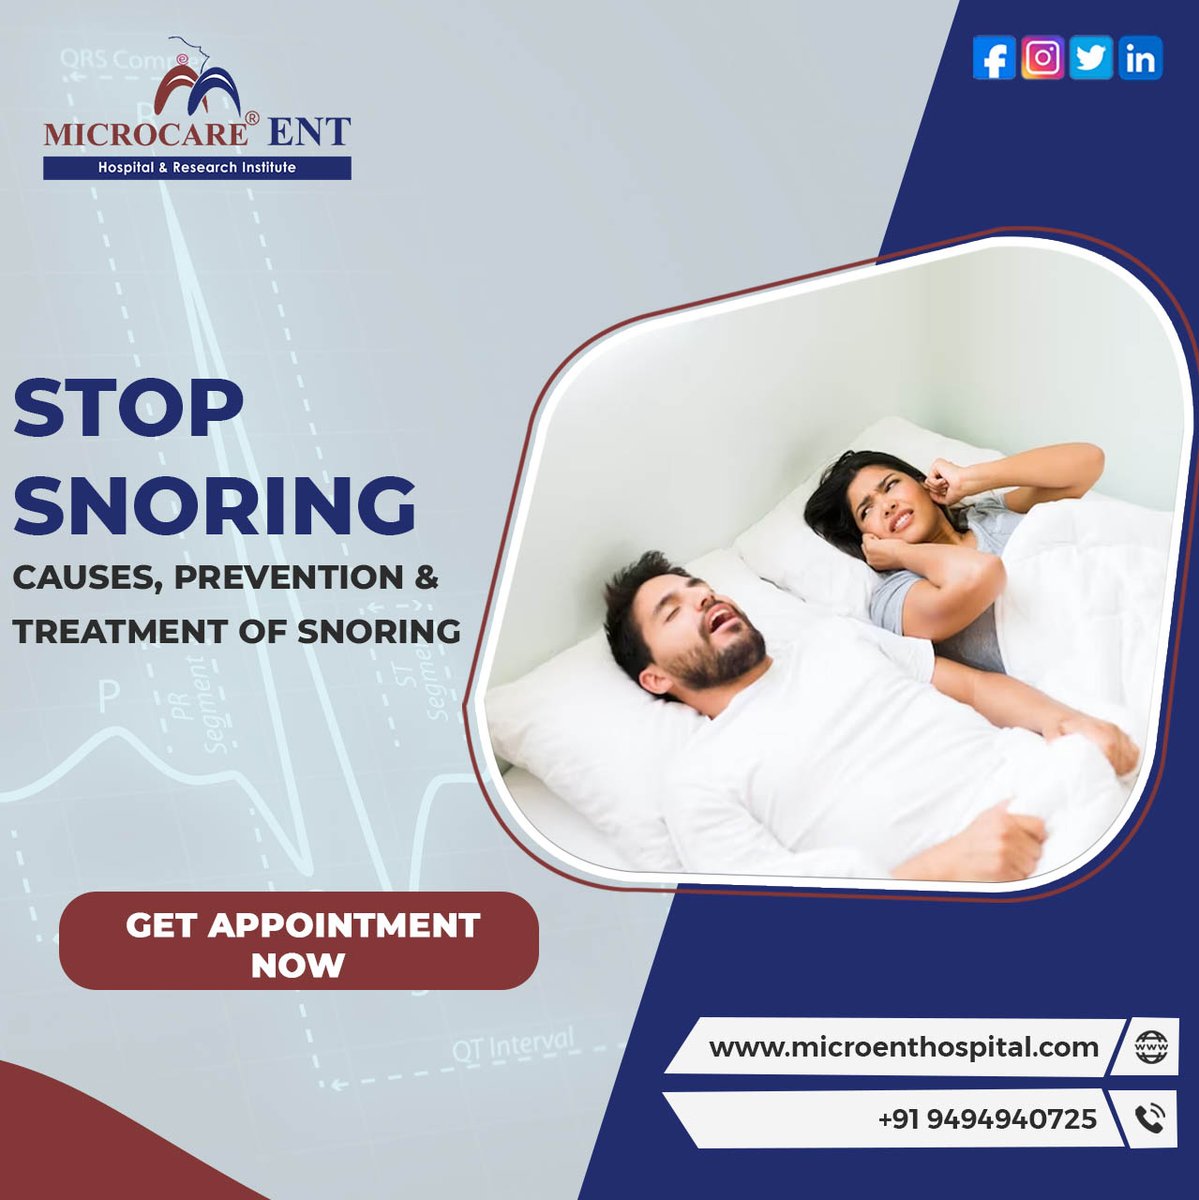 Say Goodbye to Snoring! Find Permanent Relief at MicrocareENT Hospital. Schedule an Appointment Now.

Contact:- 9494940725
Visit:- microenthospital.com

#microcareENT #sleep #sleepbetter #snore #stopsnoring #sleeping #health #healthcare  #HealthTips #doctor #medicine